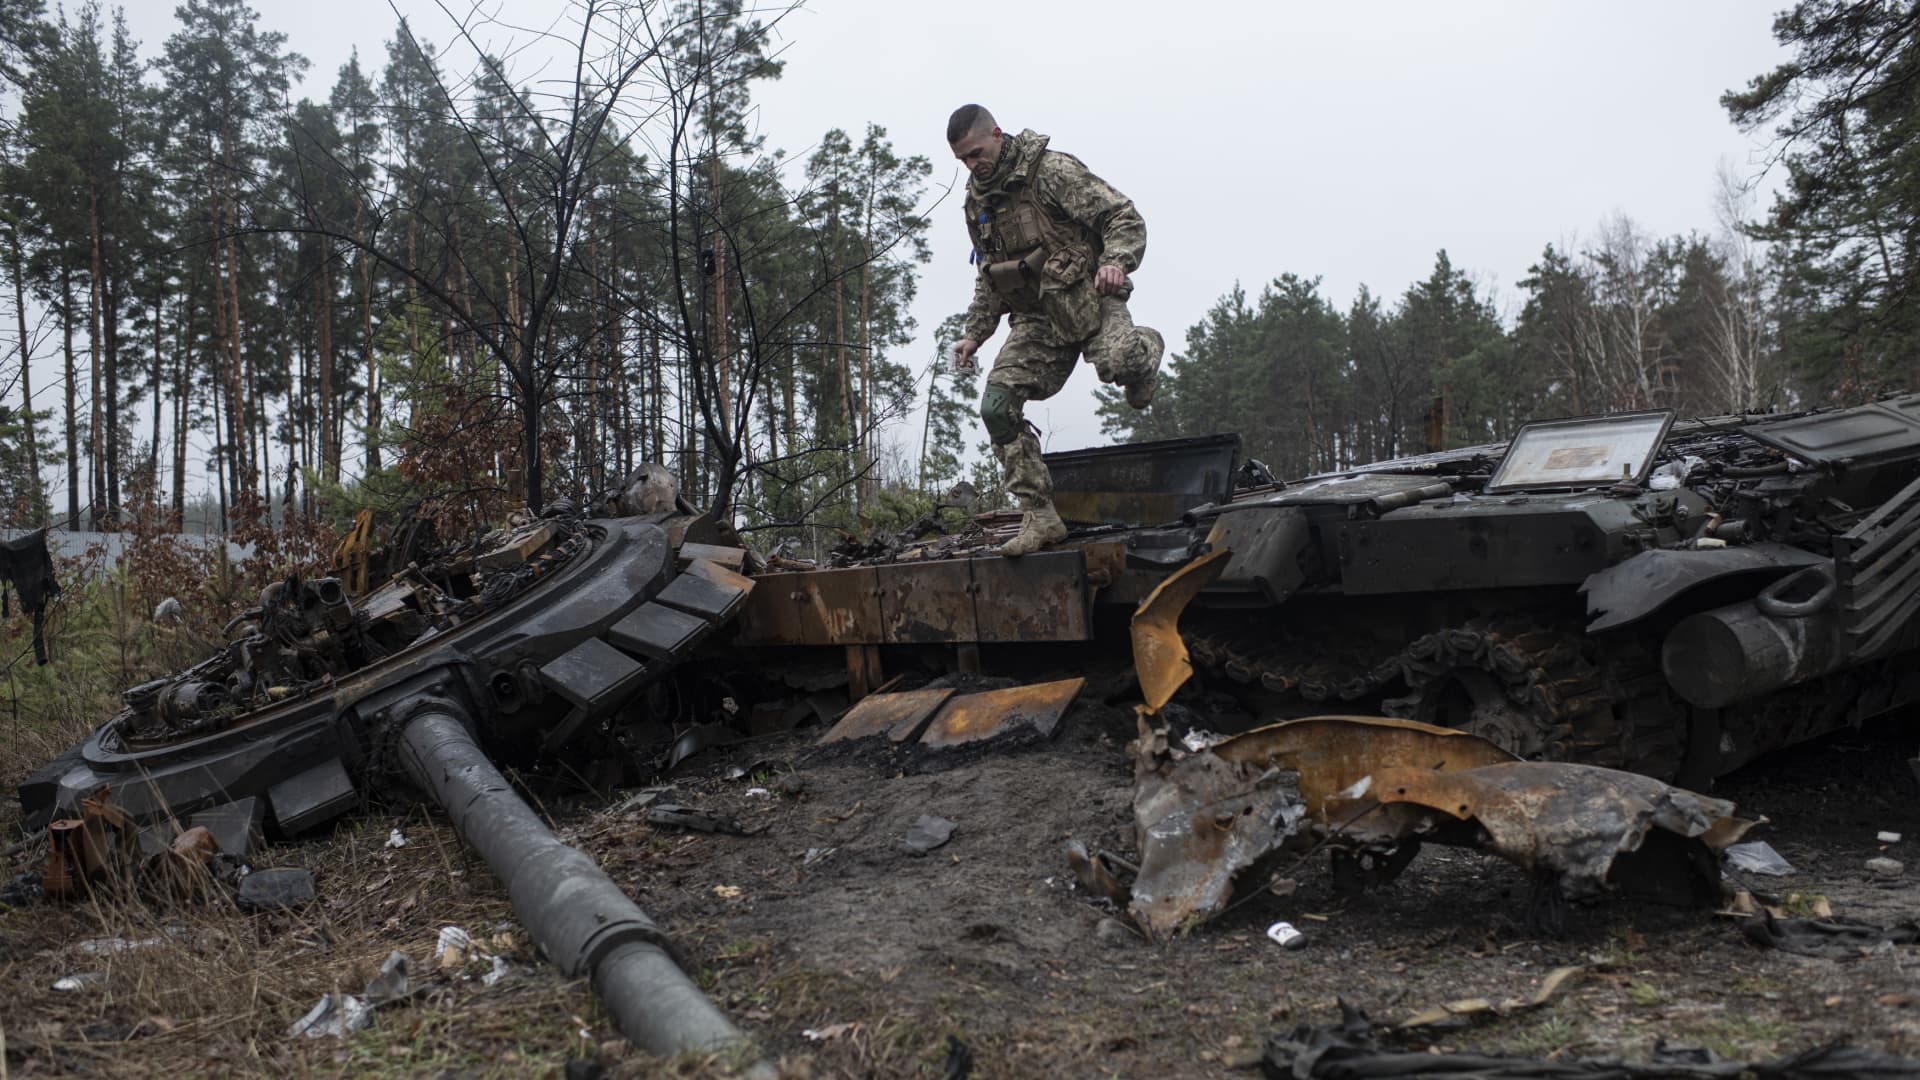 A Ukrainian soldier inspects a burnt Russian tank on April 2, 2022 in Dmytrivka, just outside Kyiv. Russian forces around the capital have been pushed back in places by Ukrainian counter-attacks.